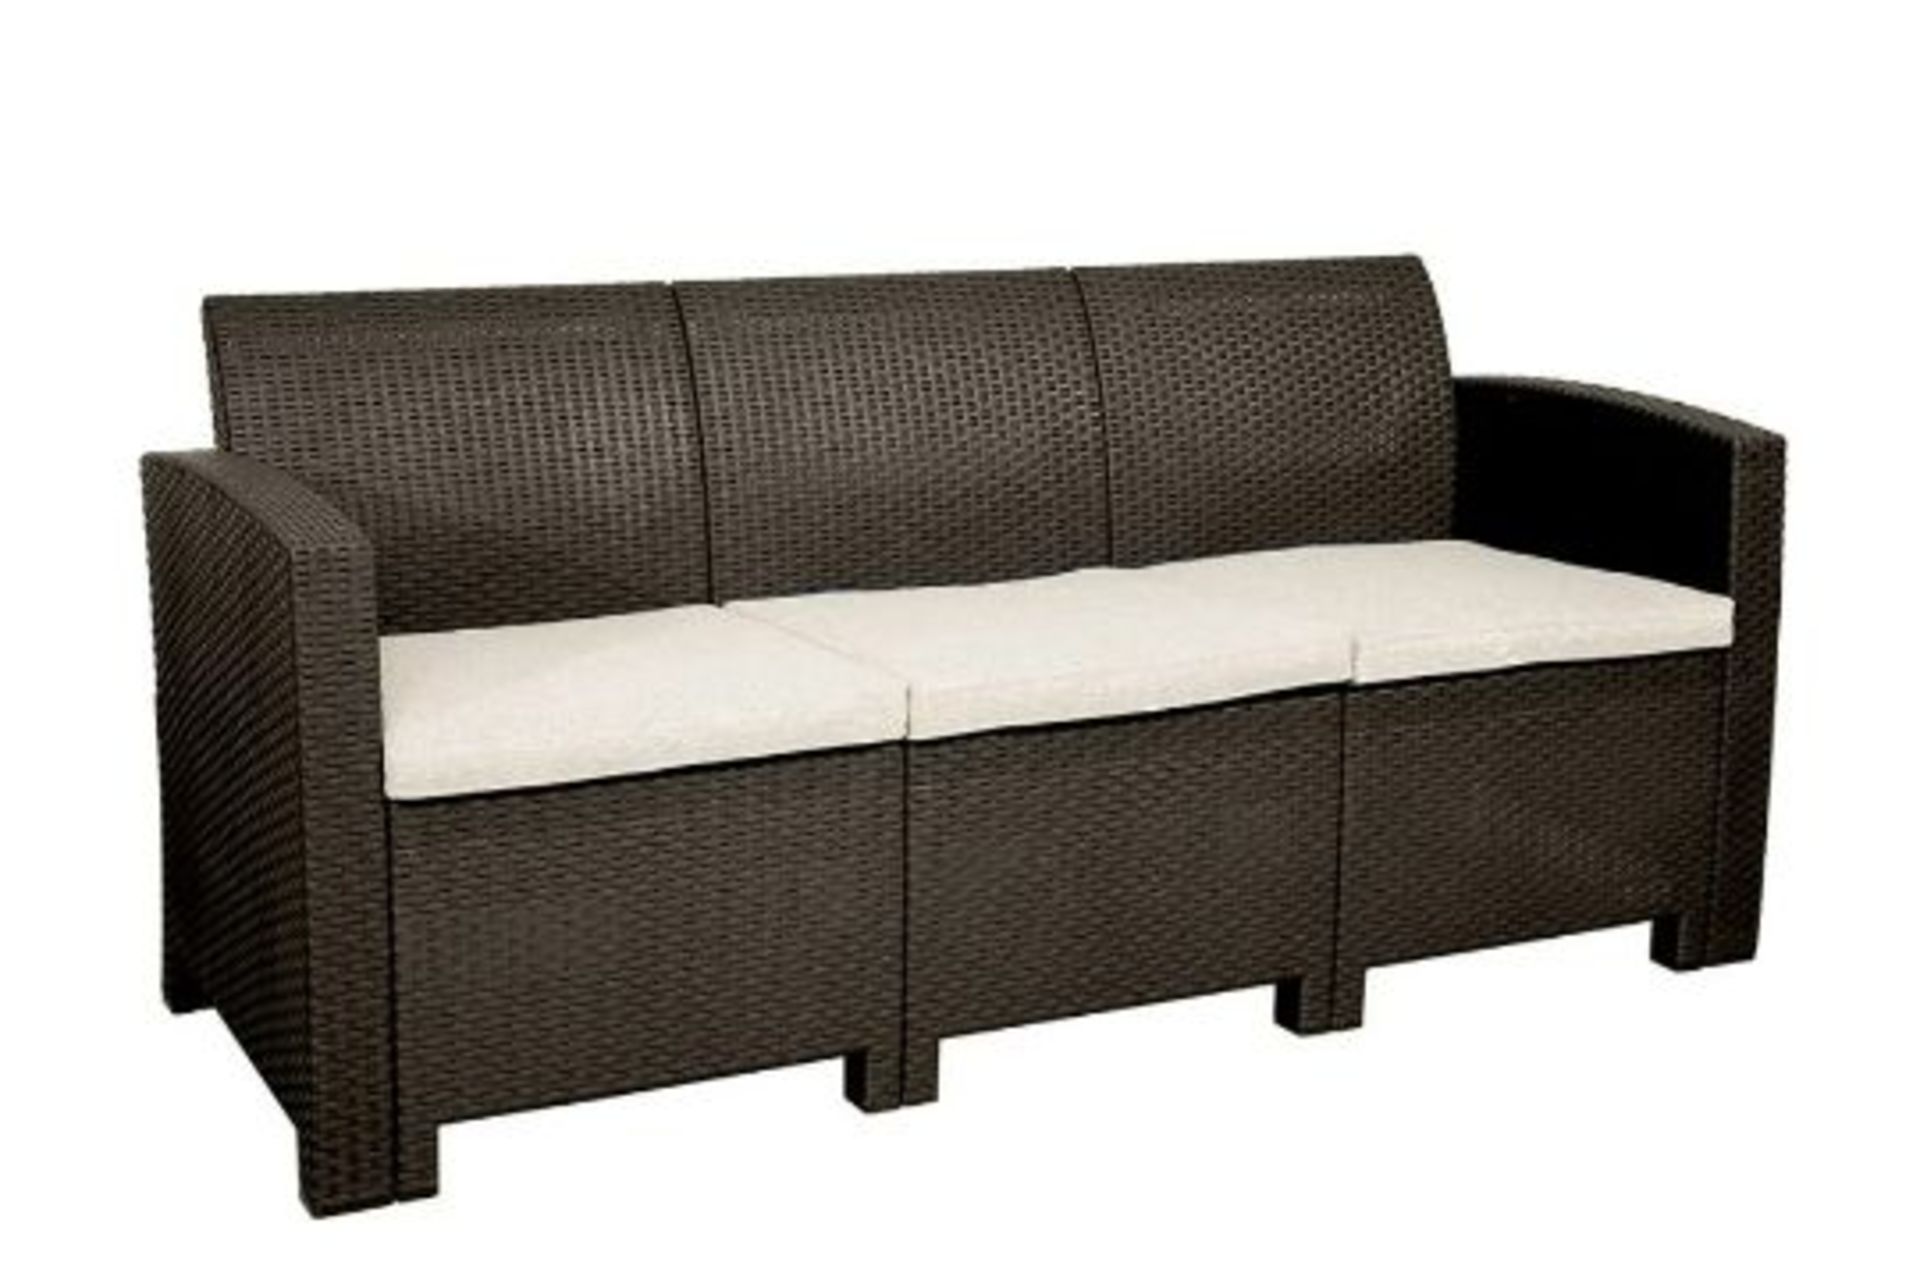 New Boxed Marbella 3-Seater Rattan-Effect Sofa in Brown. RRP £399.99. With a unique modern finish, - Image 2 of 4